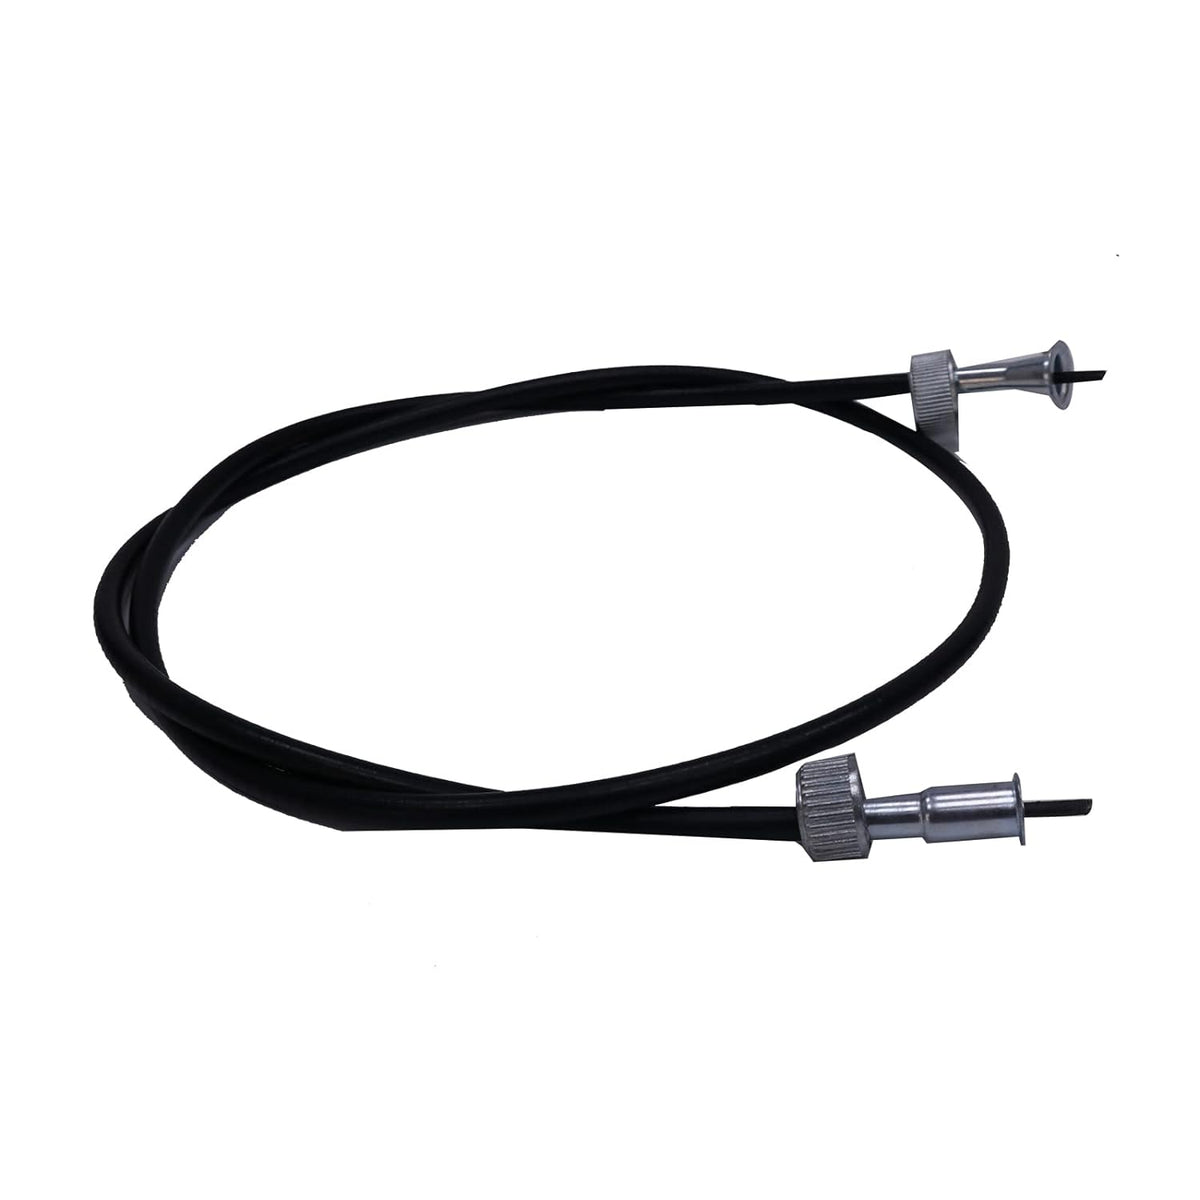 Tachometer Cable D3NN17365C for Ford New Holland Tractor 3600 3900 3930 2600 3600 4600 2610 4110 4610 - KUDUPARTS